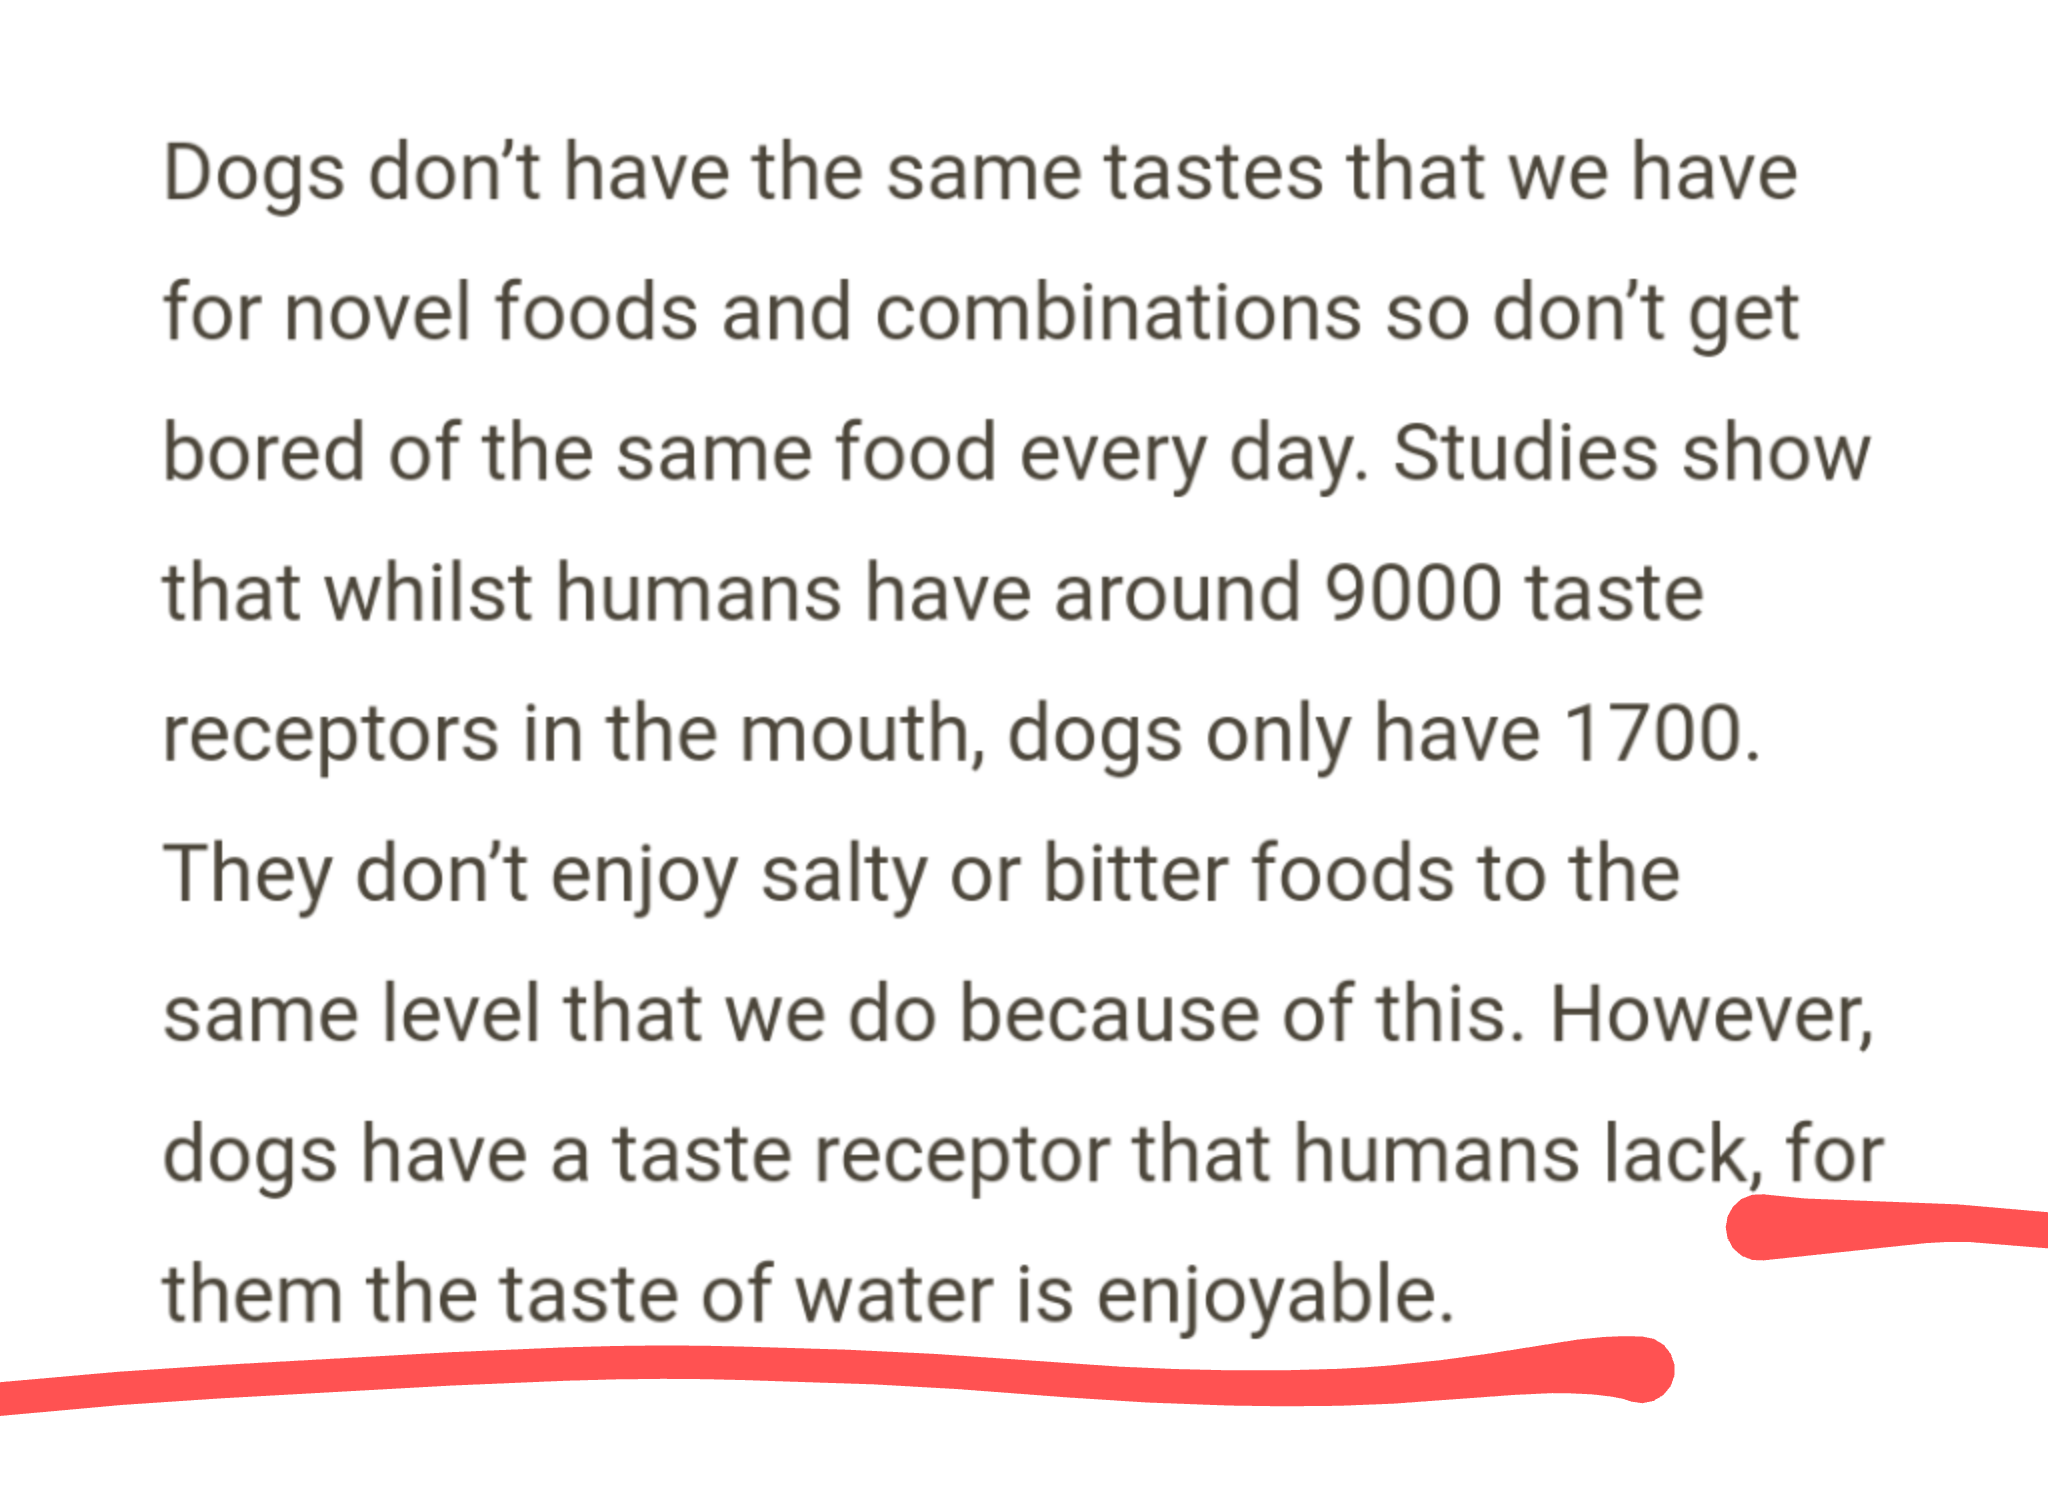 water water-memes water text: Dogs don't have the same tastes that we have for novel foods and combinations so don't get bored of the same food every day. Studies show that whilst humans have around 9000 taste receptors in the mouth, dogs only have 1700. They don't enjoy salty or bitter foods to the same level that we do because of this. However, dogs have a taste receptor that humans lack, for them the taste of water is enjoyable. 